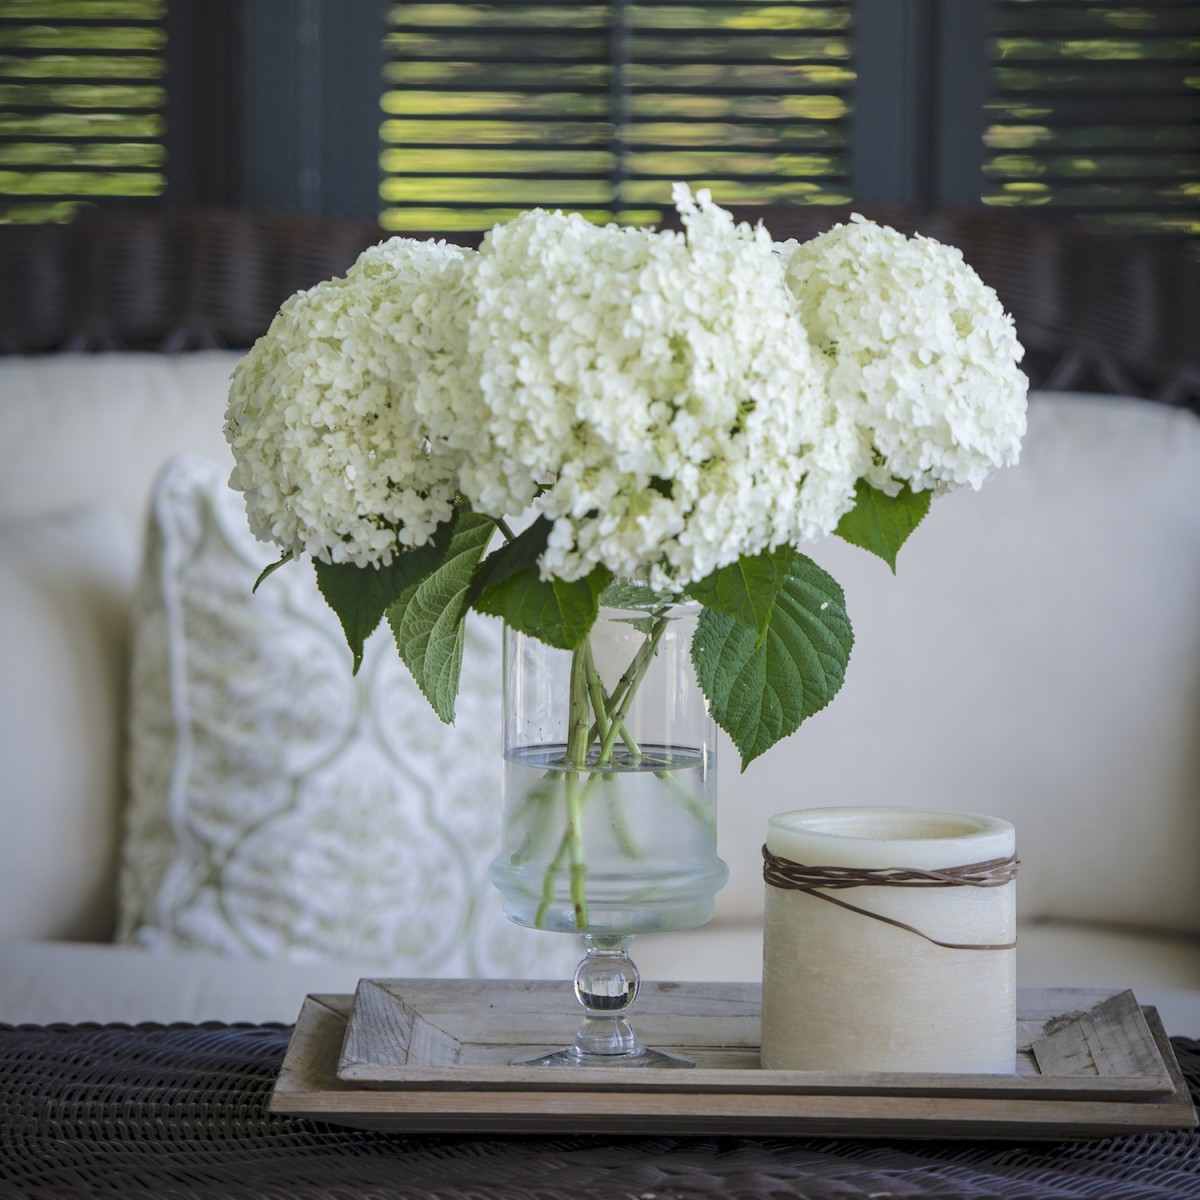 Hydrangea arborescens, or smooth hydrangeas, grows best in morning sun and afternoon shade. P. Allen Smith loves that the large white flowers age to a limey-green and make a beautiful cut flower.